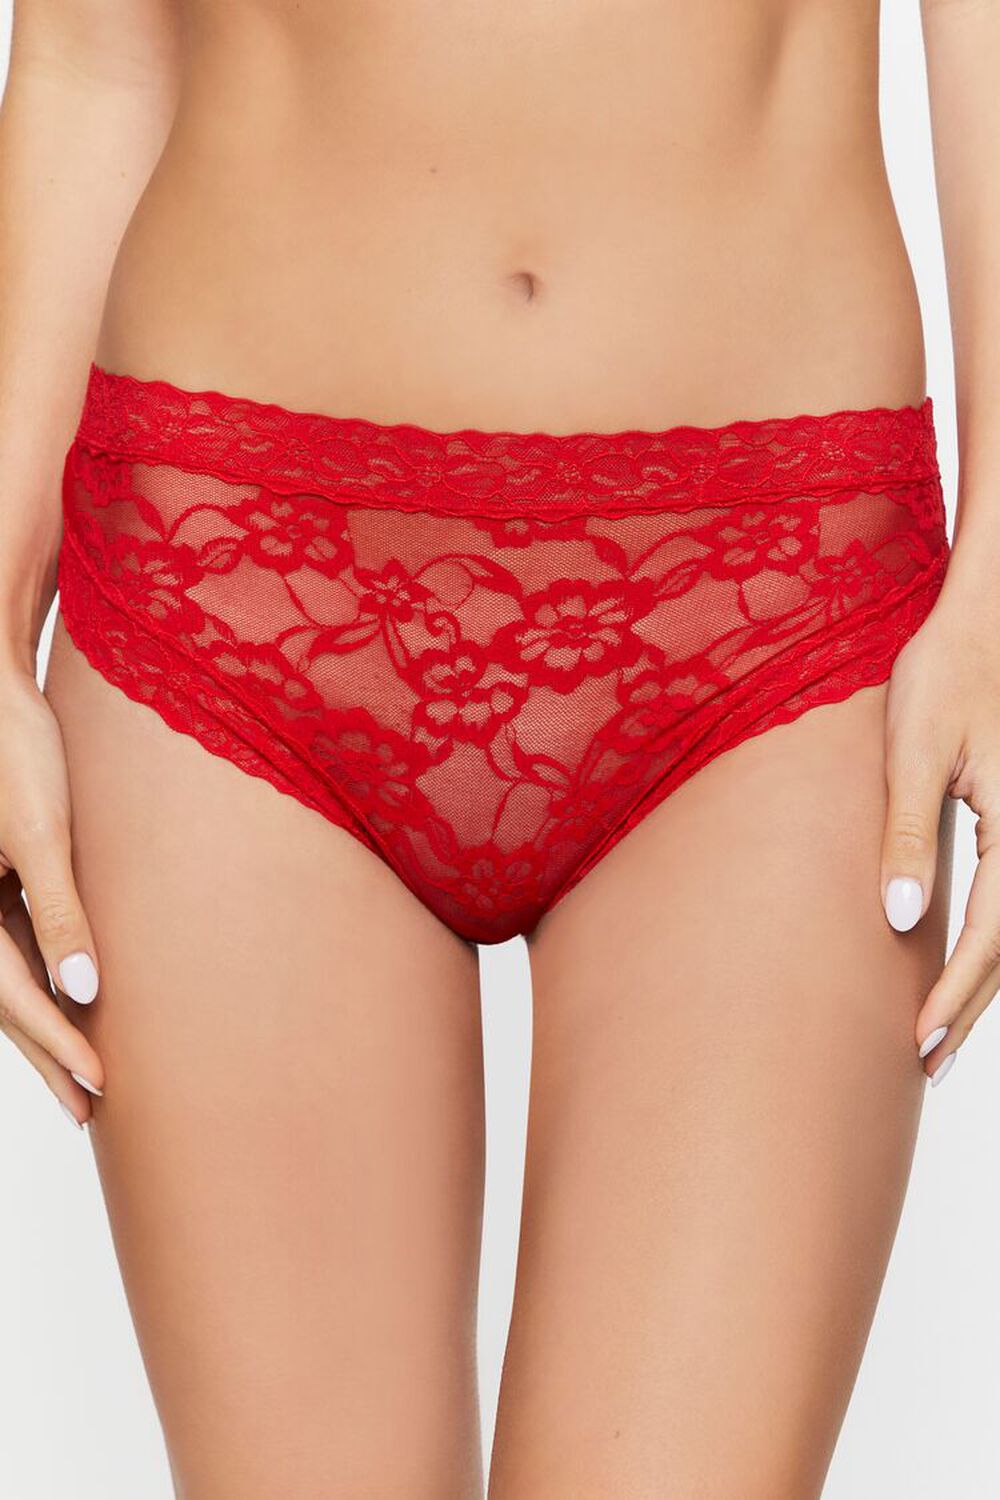 TOMATO Floral Lace Cheeky Panties, image 2